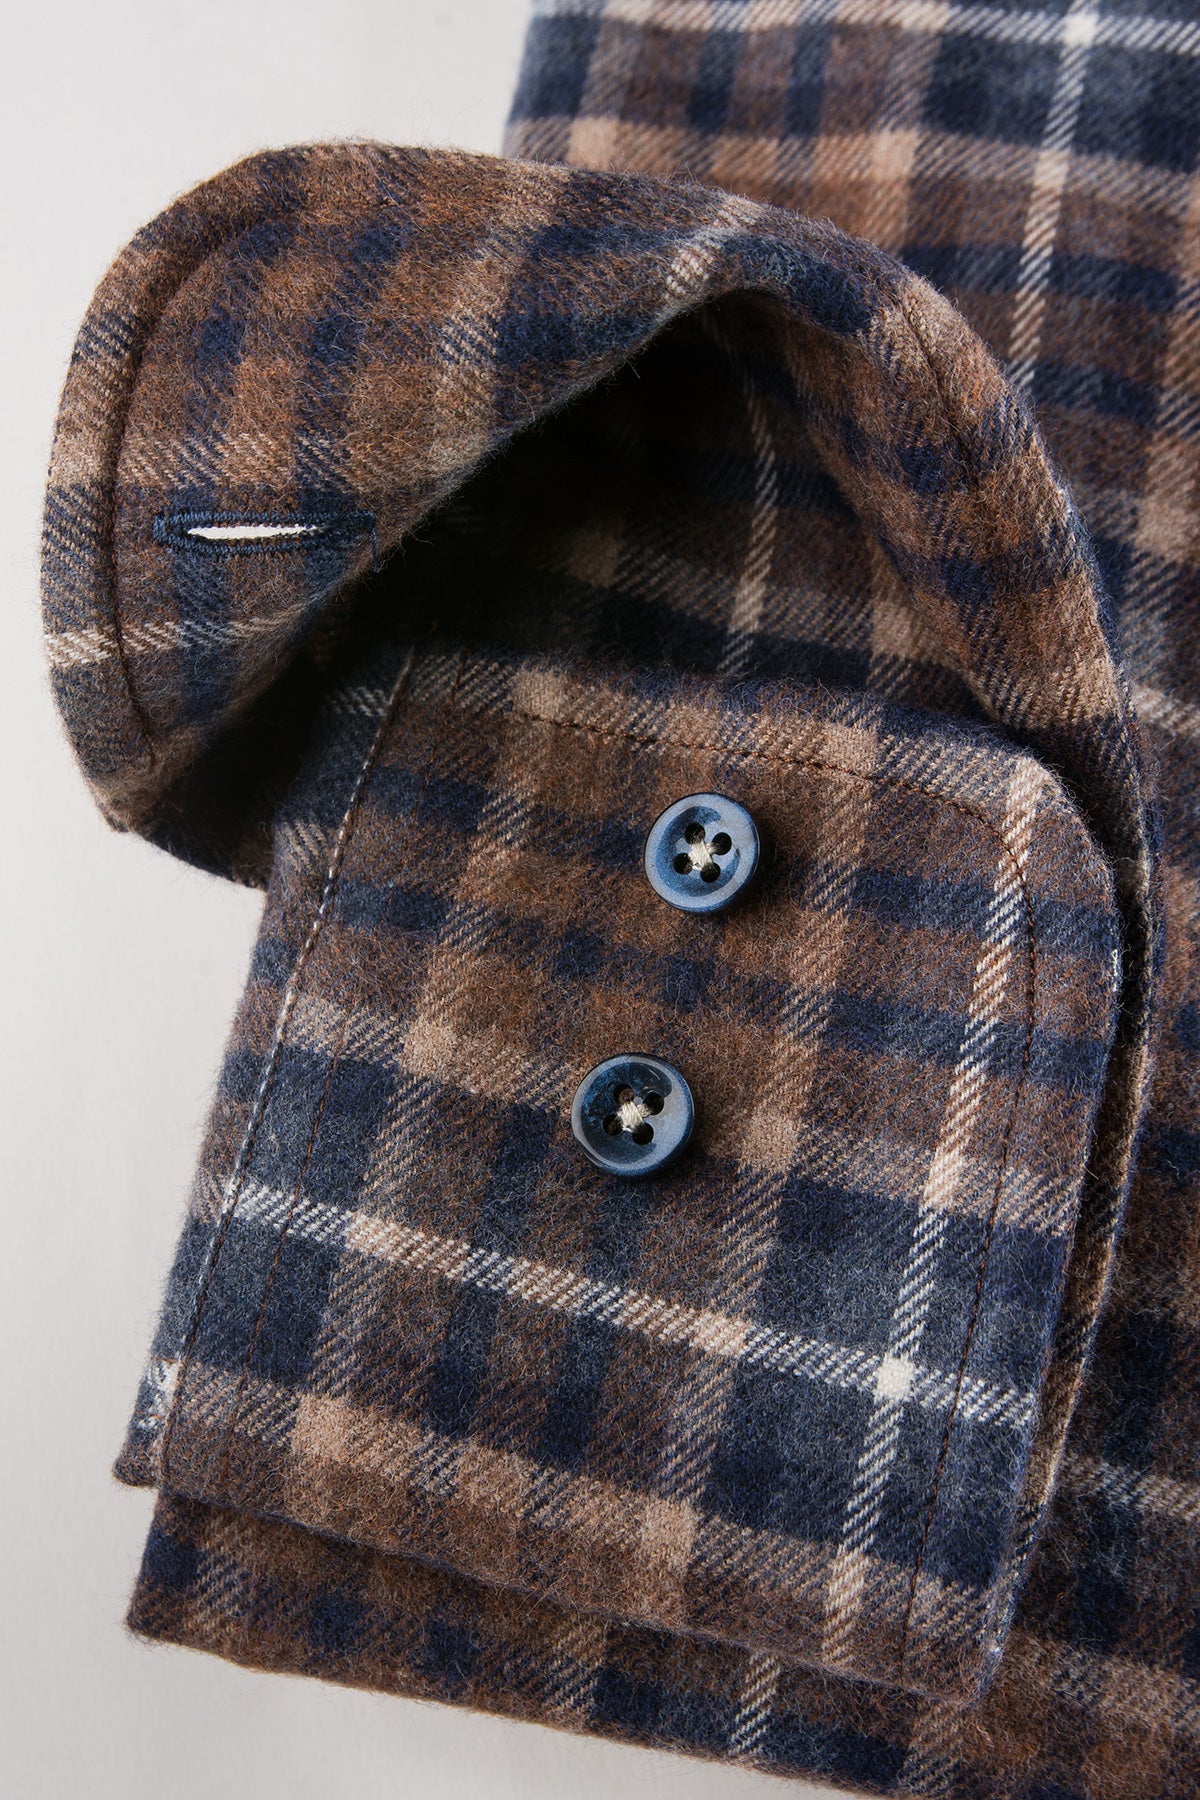 Brown checked flannel slim fit shirt